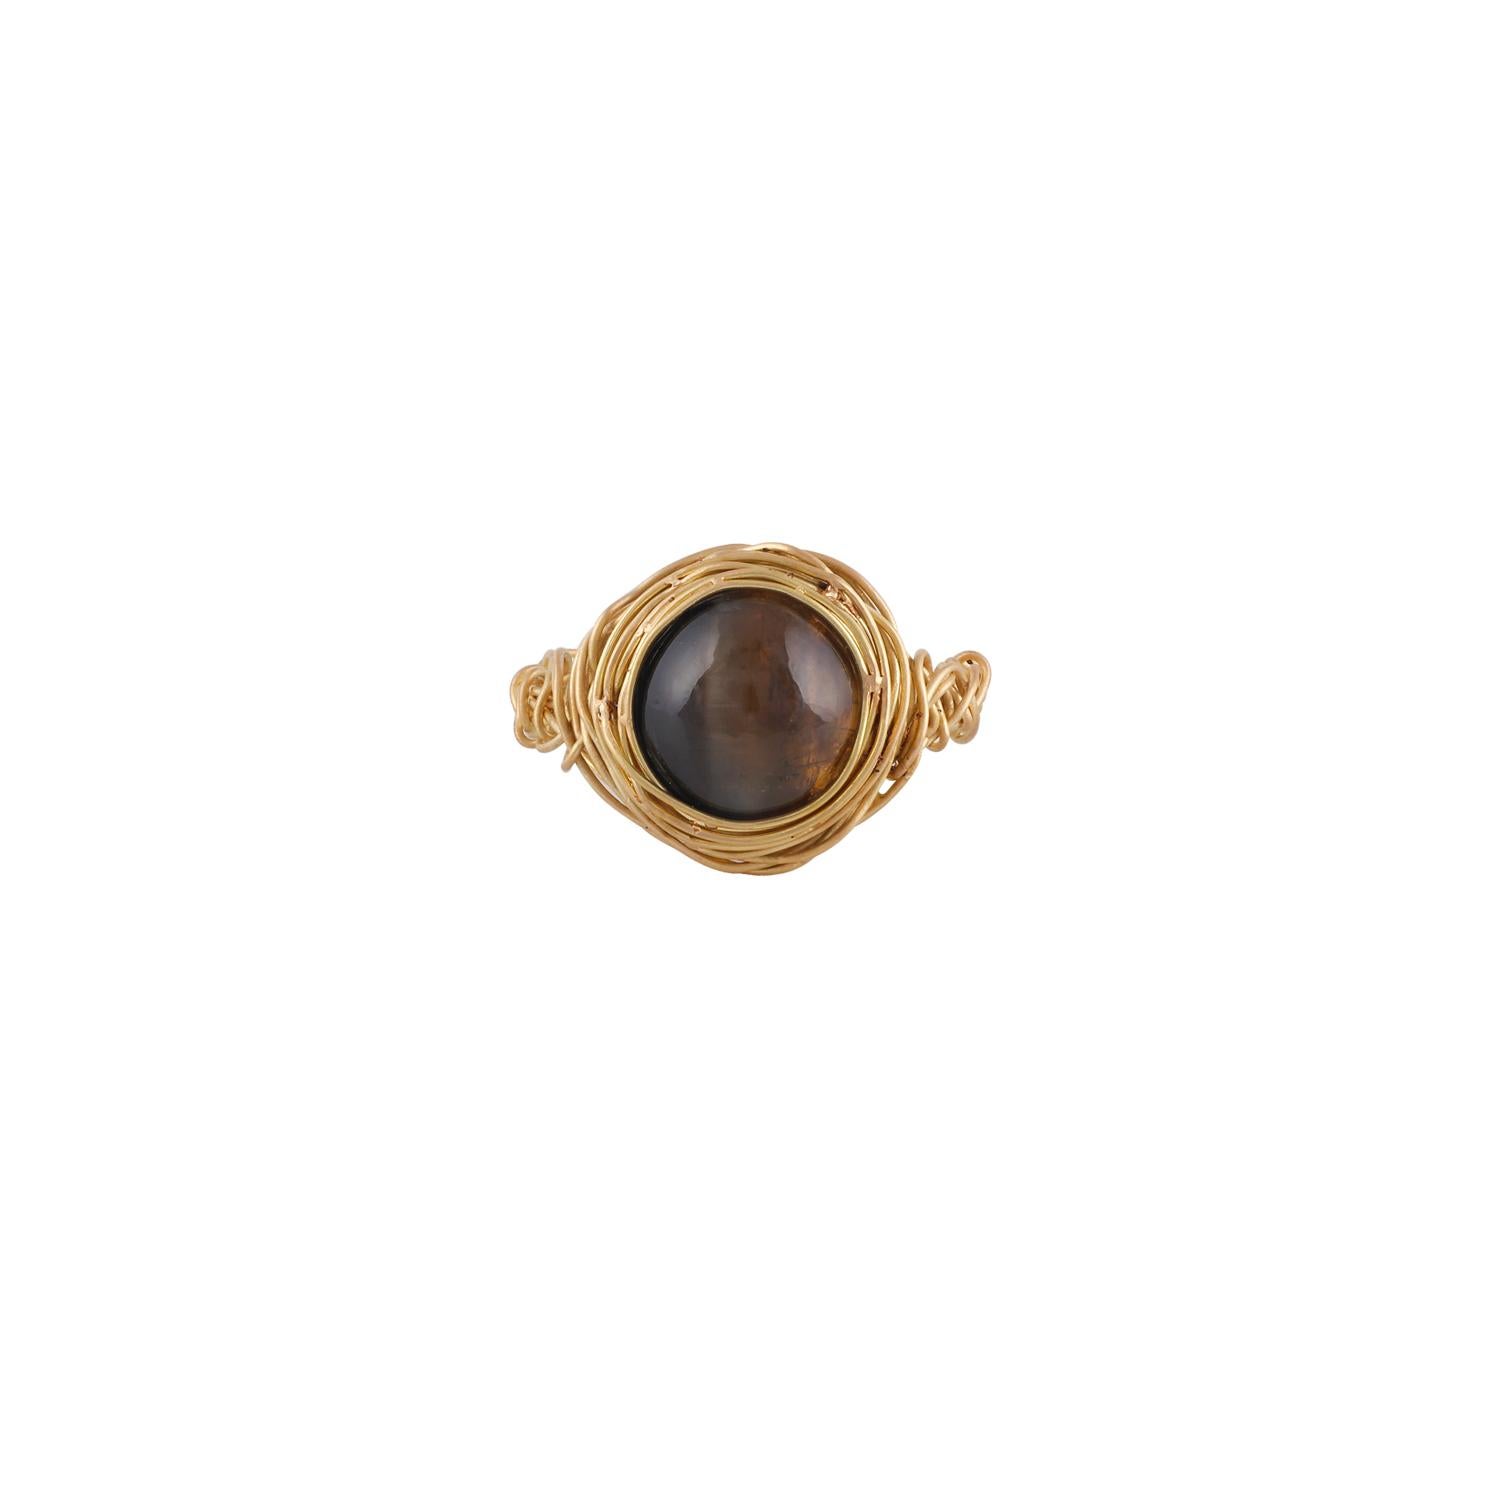 Its an exclusive chrysoberyl cats eye ring studded in 18k yellow gold with 1 piece of cabochon shaped honey color chrysoberyl cats eye weight 8.09 carat, this entire ring studded in 18k yellow gold weight 4.44 grams, ring size can be change as per